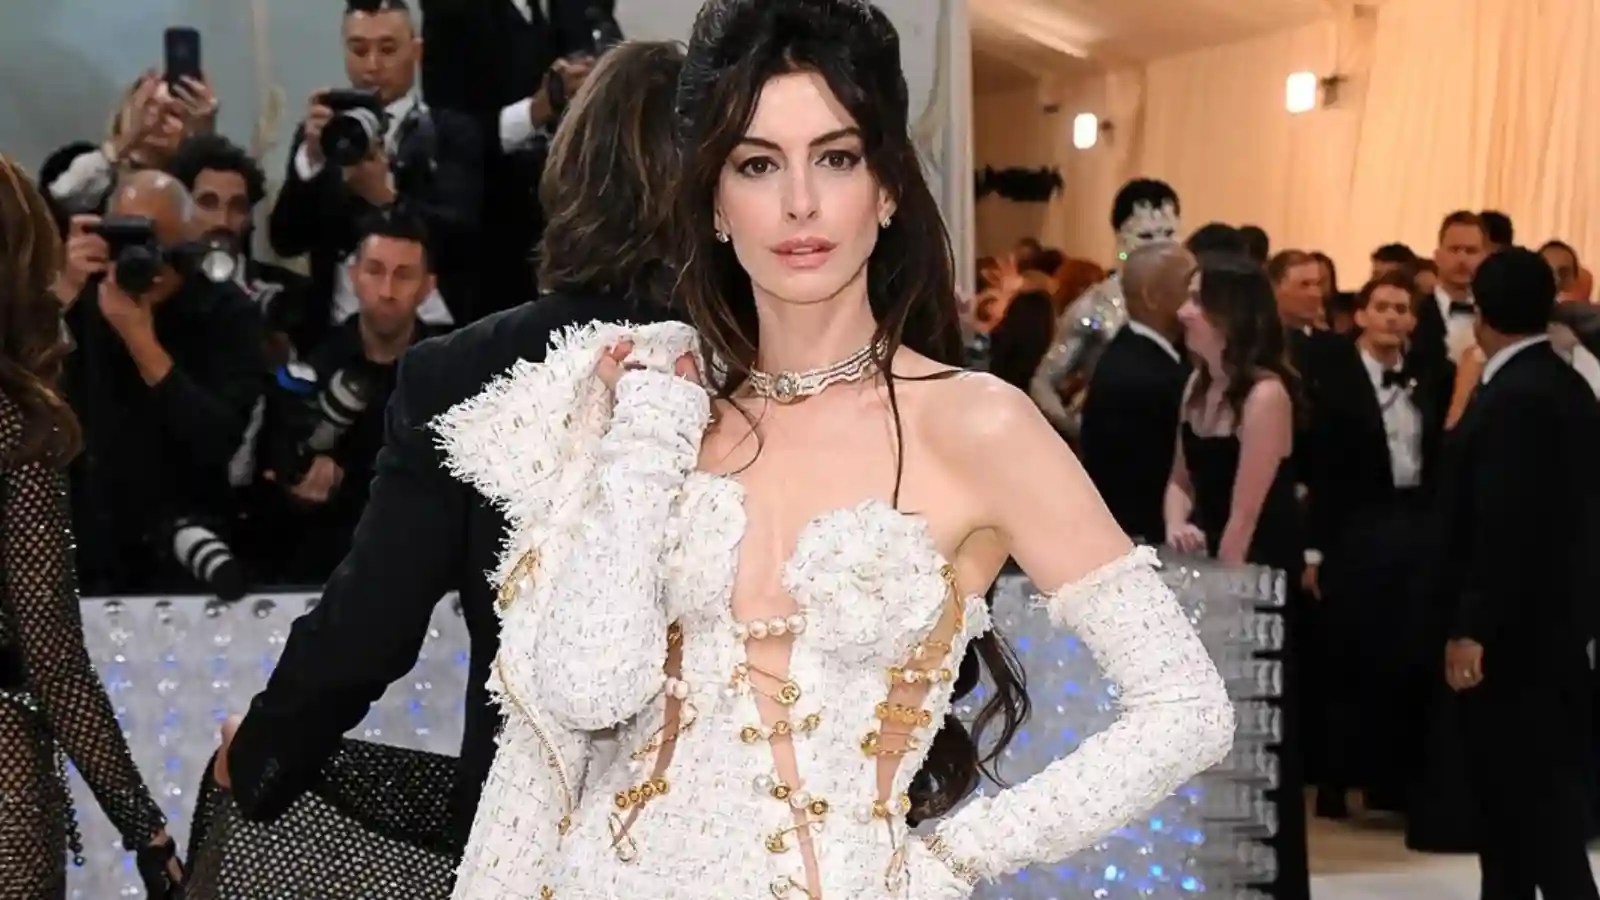 Anne Hathaway beauty is breathtaking at the Met Gala